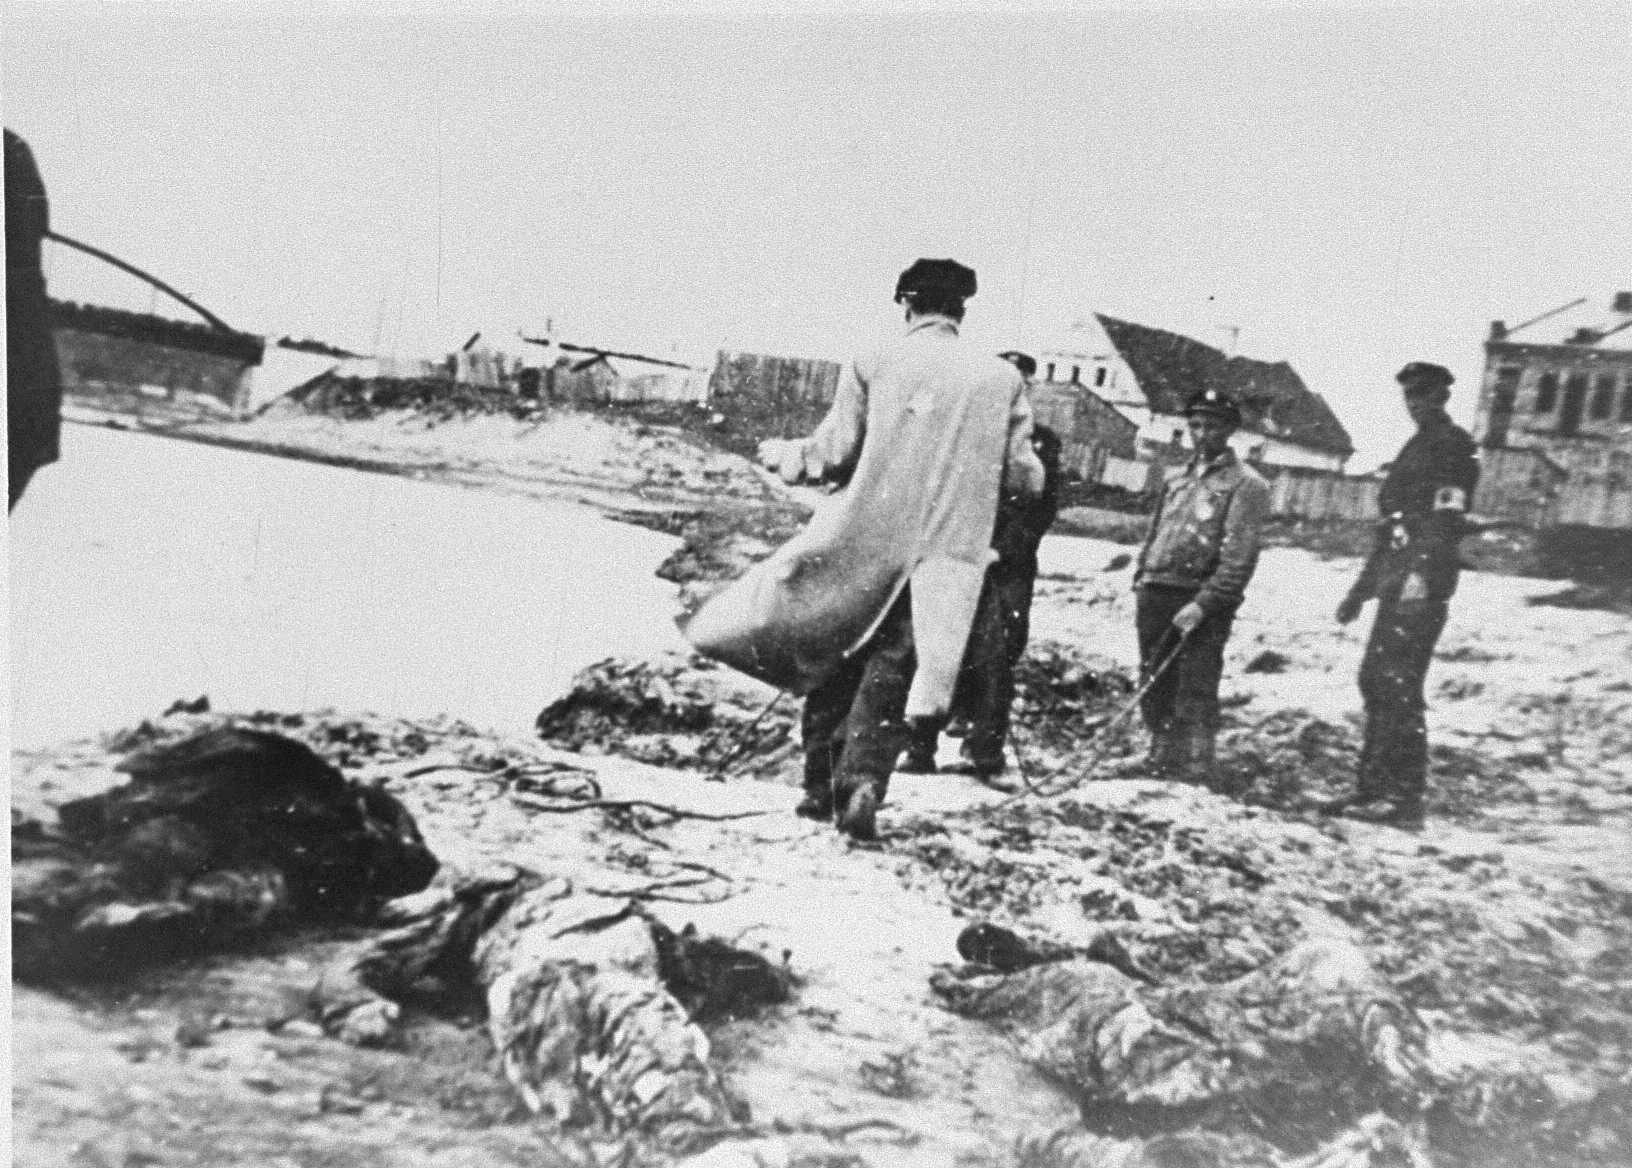 Members of the Kovno ghetto fire brigade pull the bodies of murdered Jews from the Viliya (Neris) River.